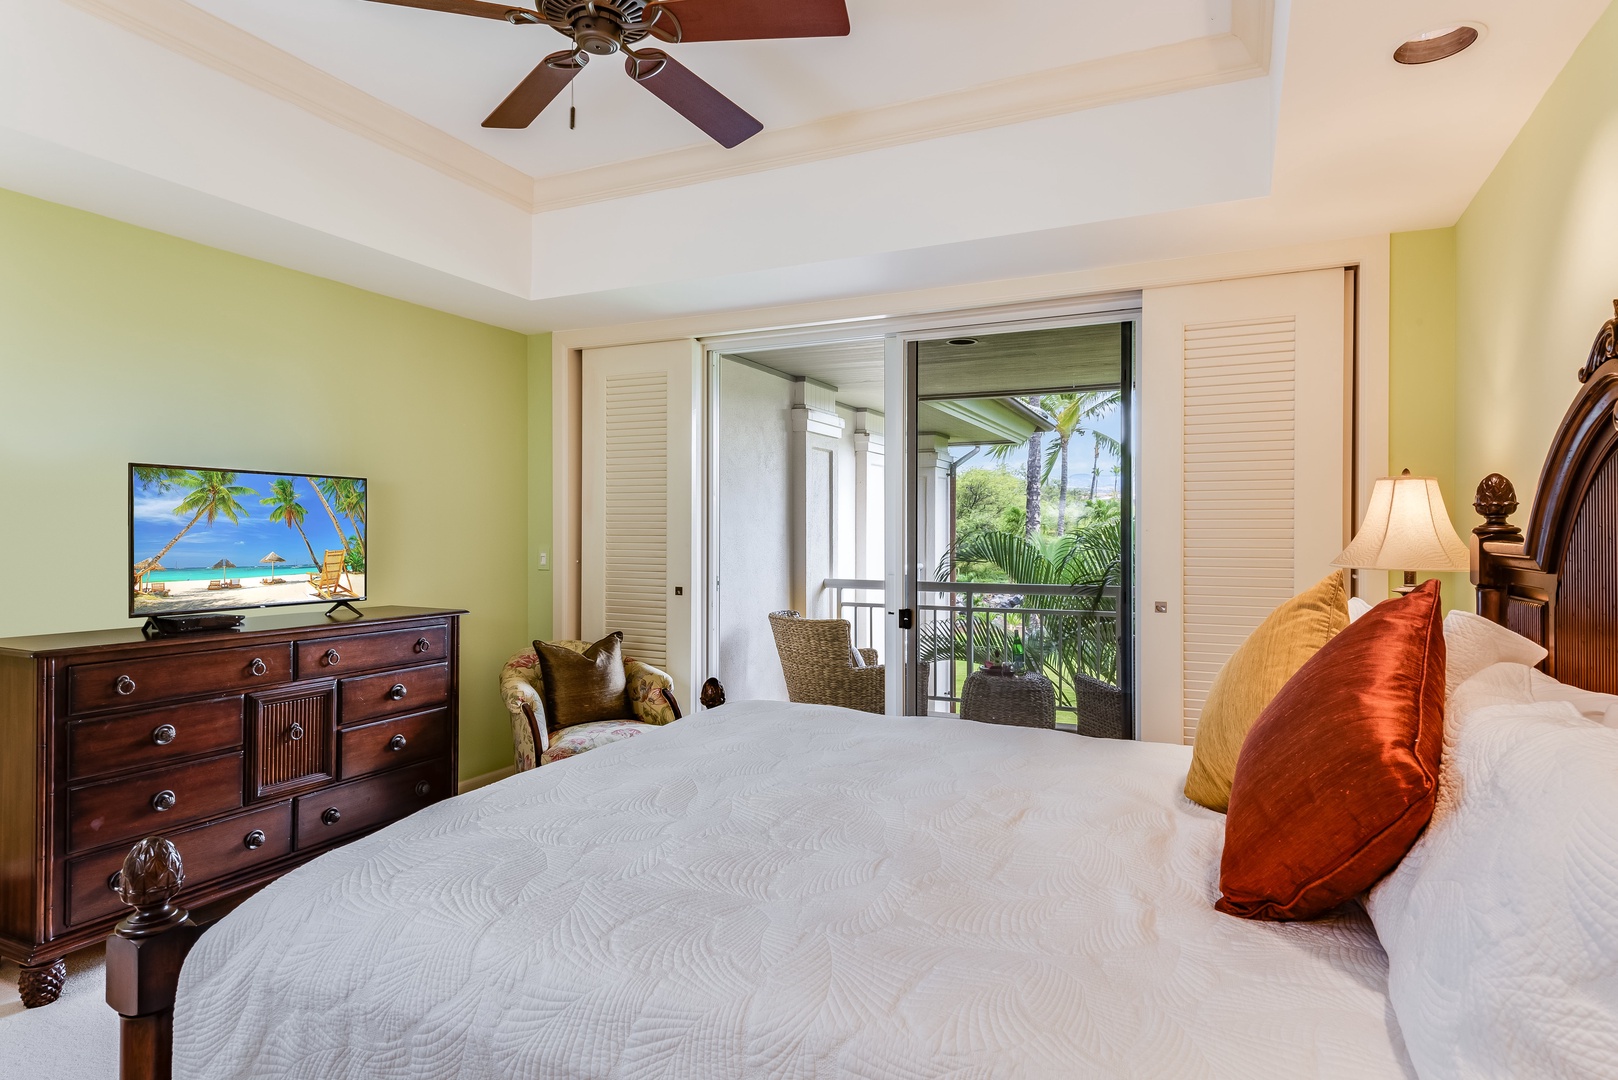 Kamuela Vacation Rentals, The Islands D3 - Second Bedroom Features Private Lanai and Smart TV